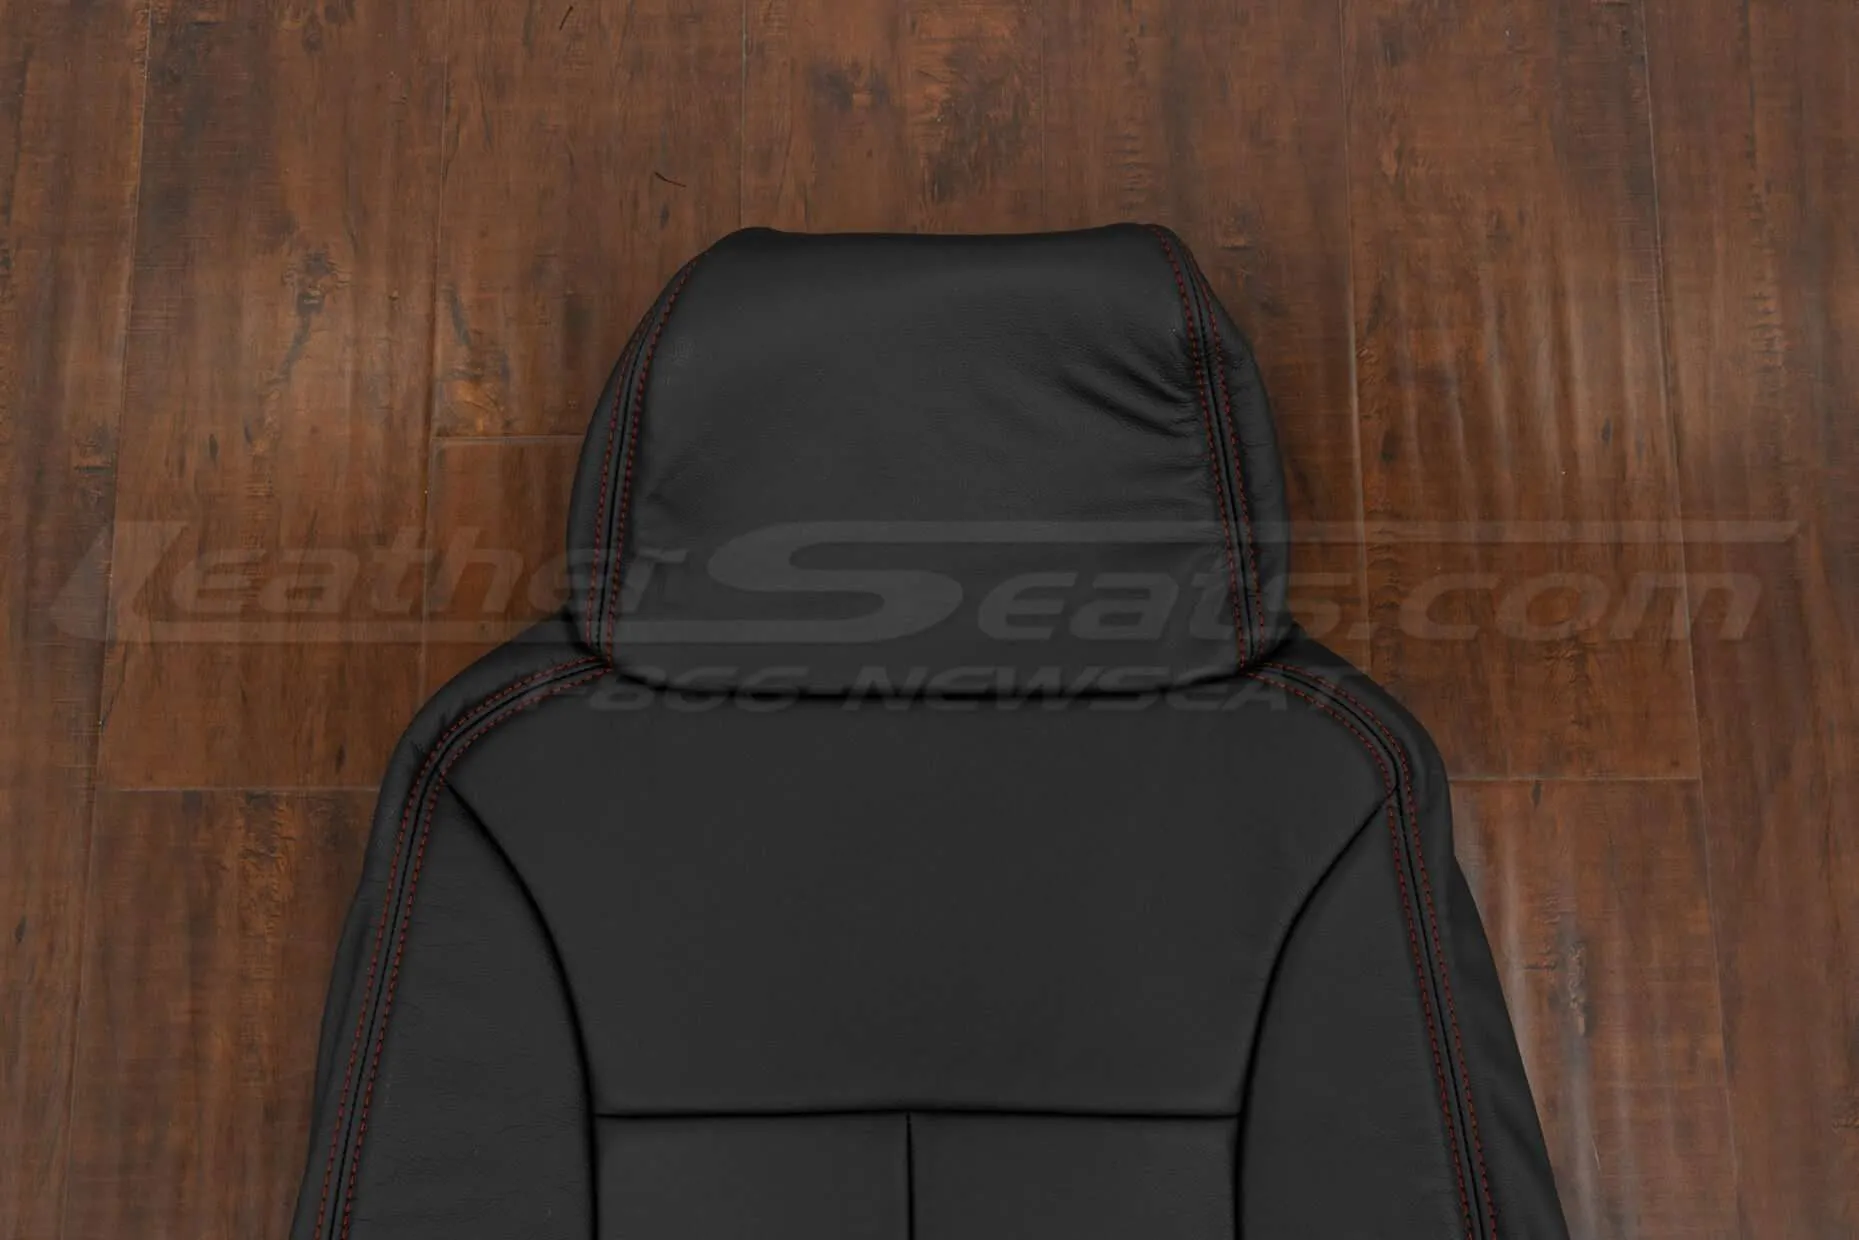 Upper section of backrest and headrest